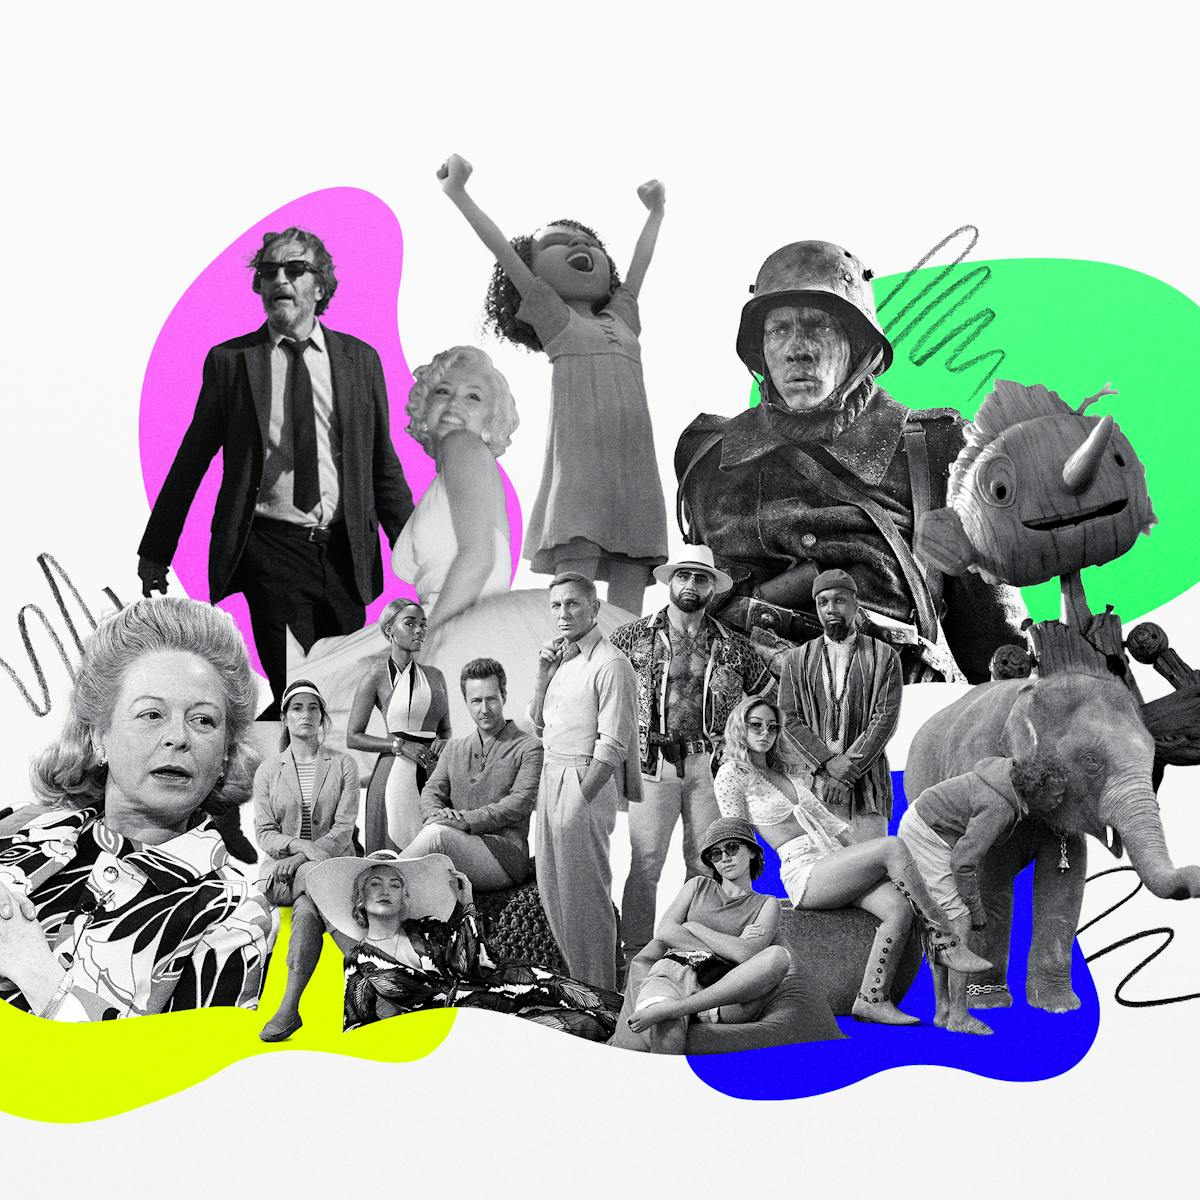 A graphic of Netflix's Oscar nominated titles including The Martha Mitchell Effect, BARDO, Glass Onion: A Knives Out Mystery, Blonde, The Sea Beast, Guillermo del Toro's Pinocchio, The Elephant Whisperers, and All Quiet on the Western Front. Behind them are blobs of color in yellow, blue, green, and pink.